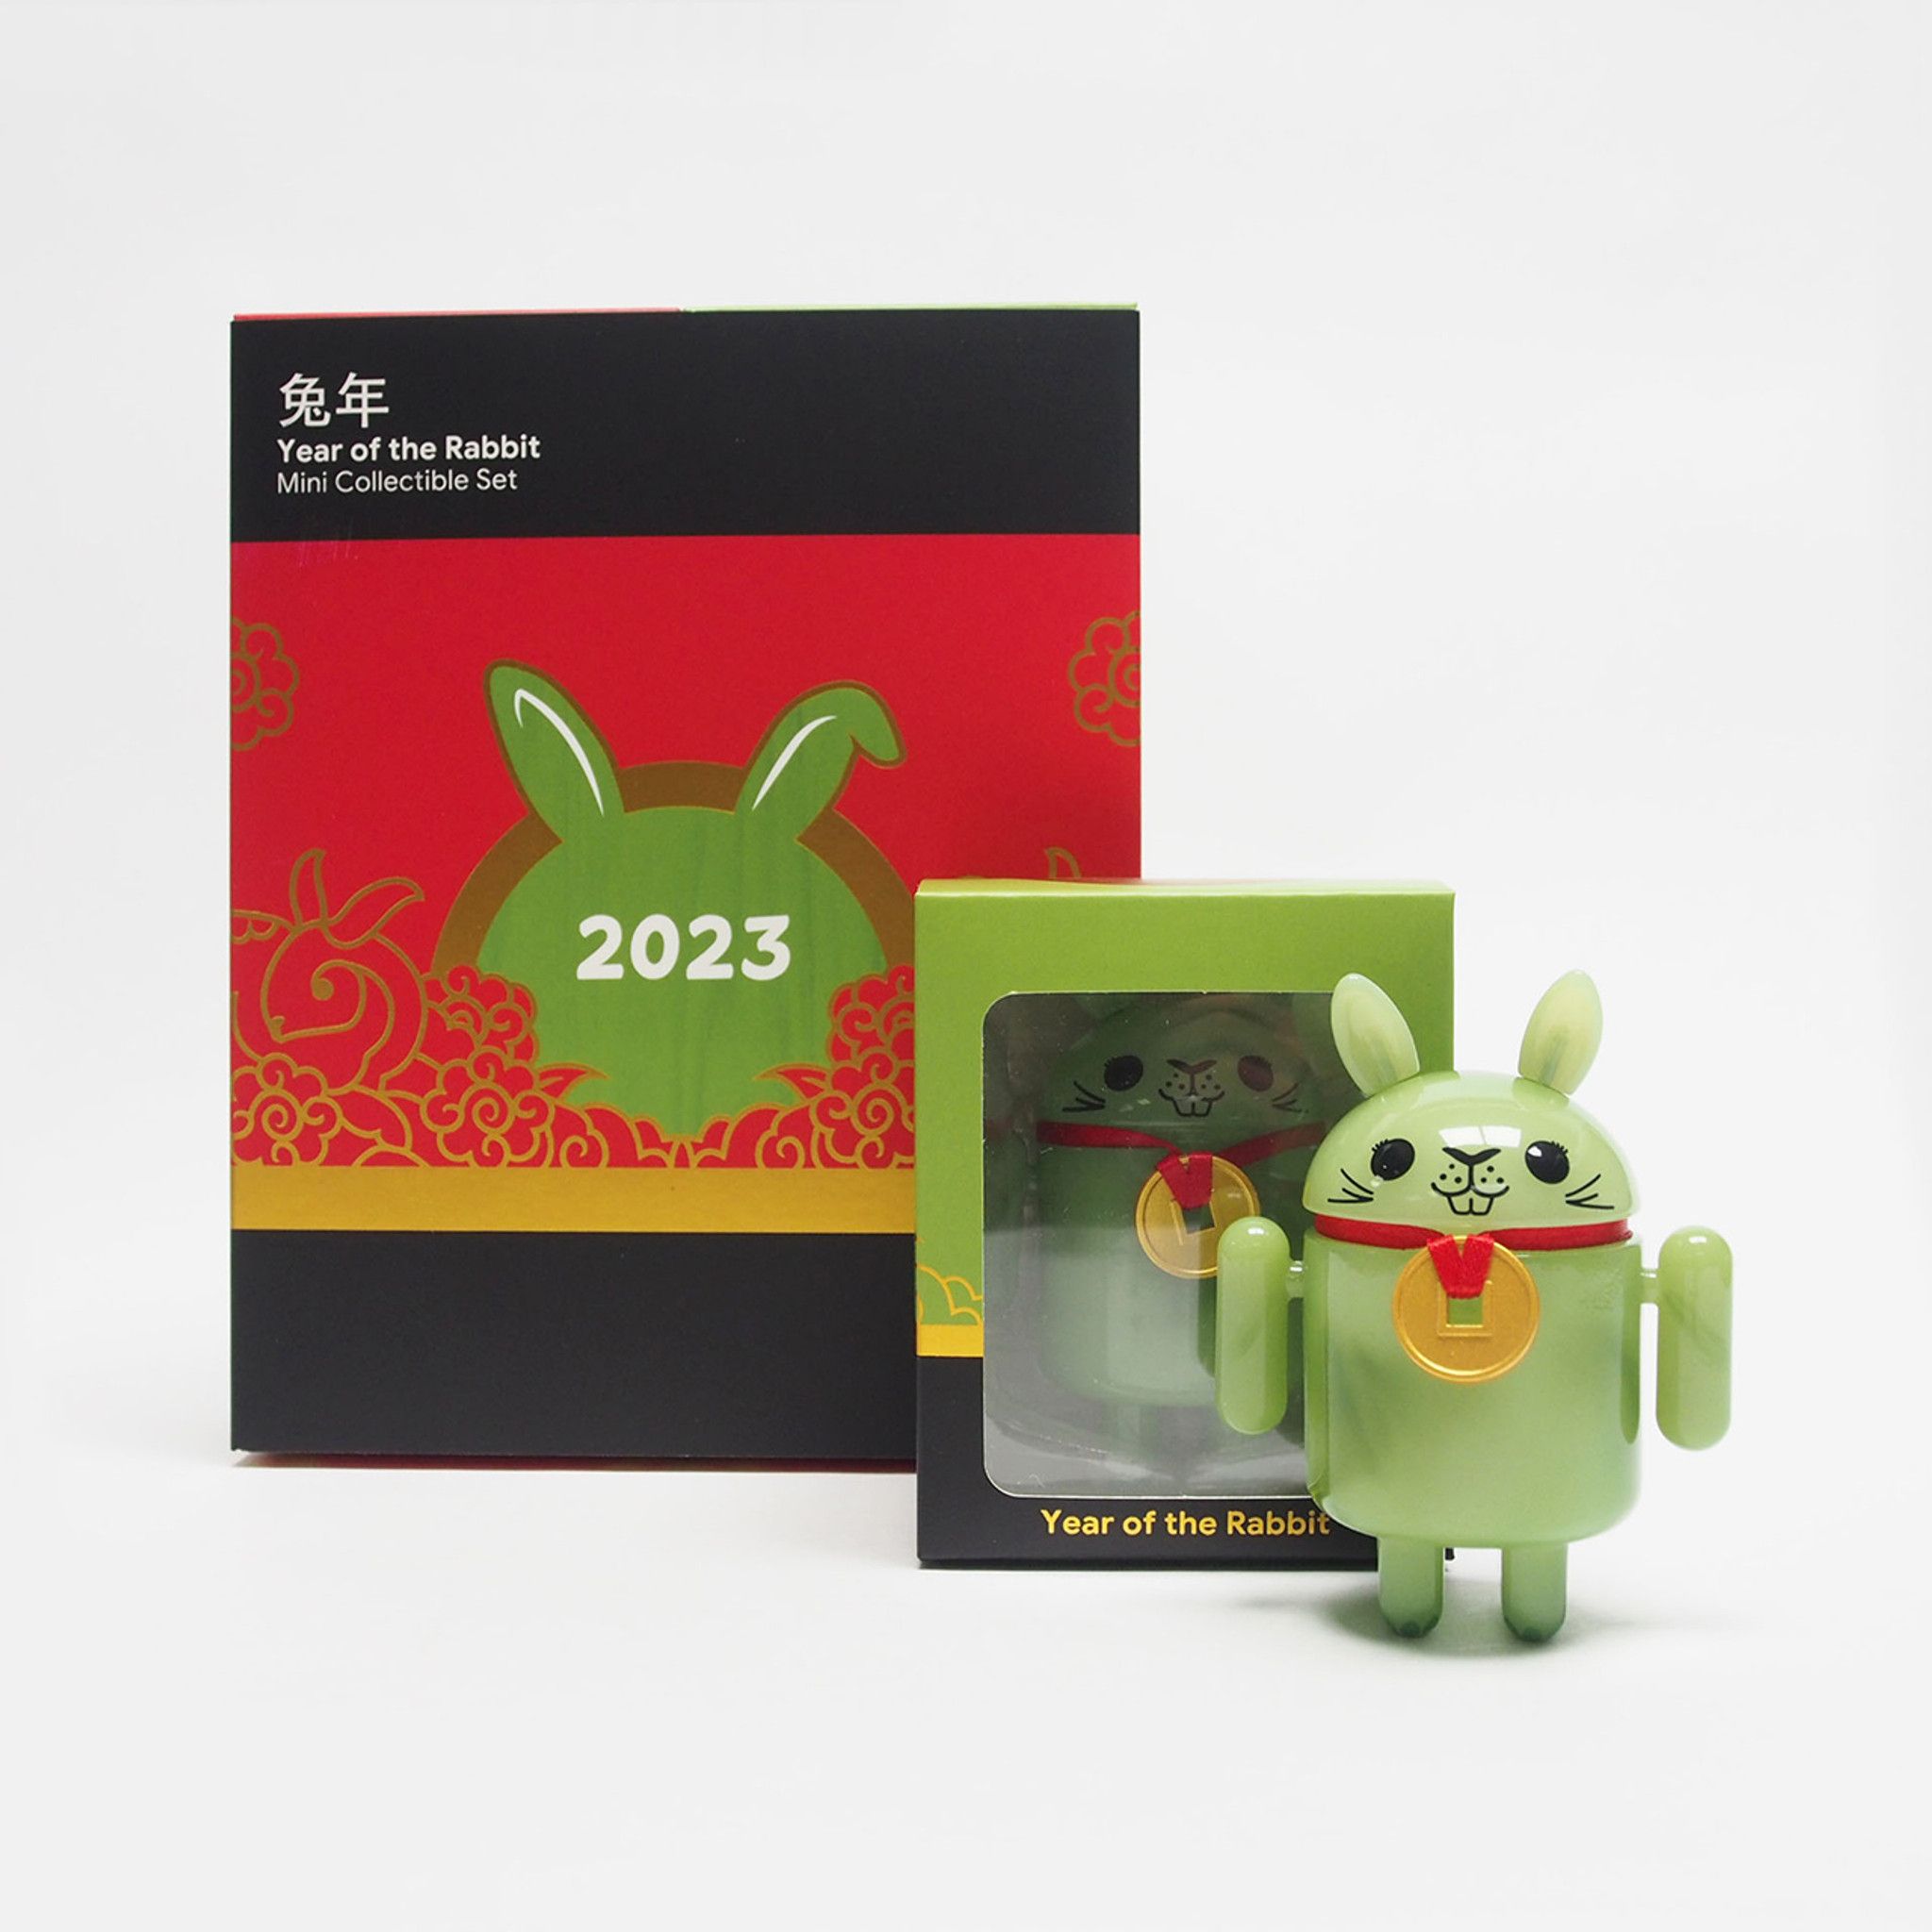 Dead Zebra's Year of the Rabbit Android collectible set jade